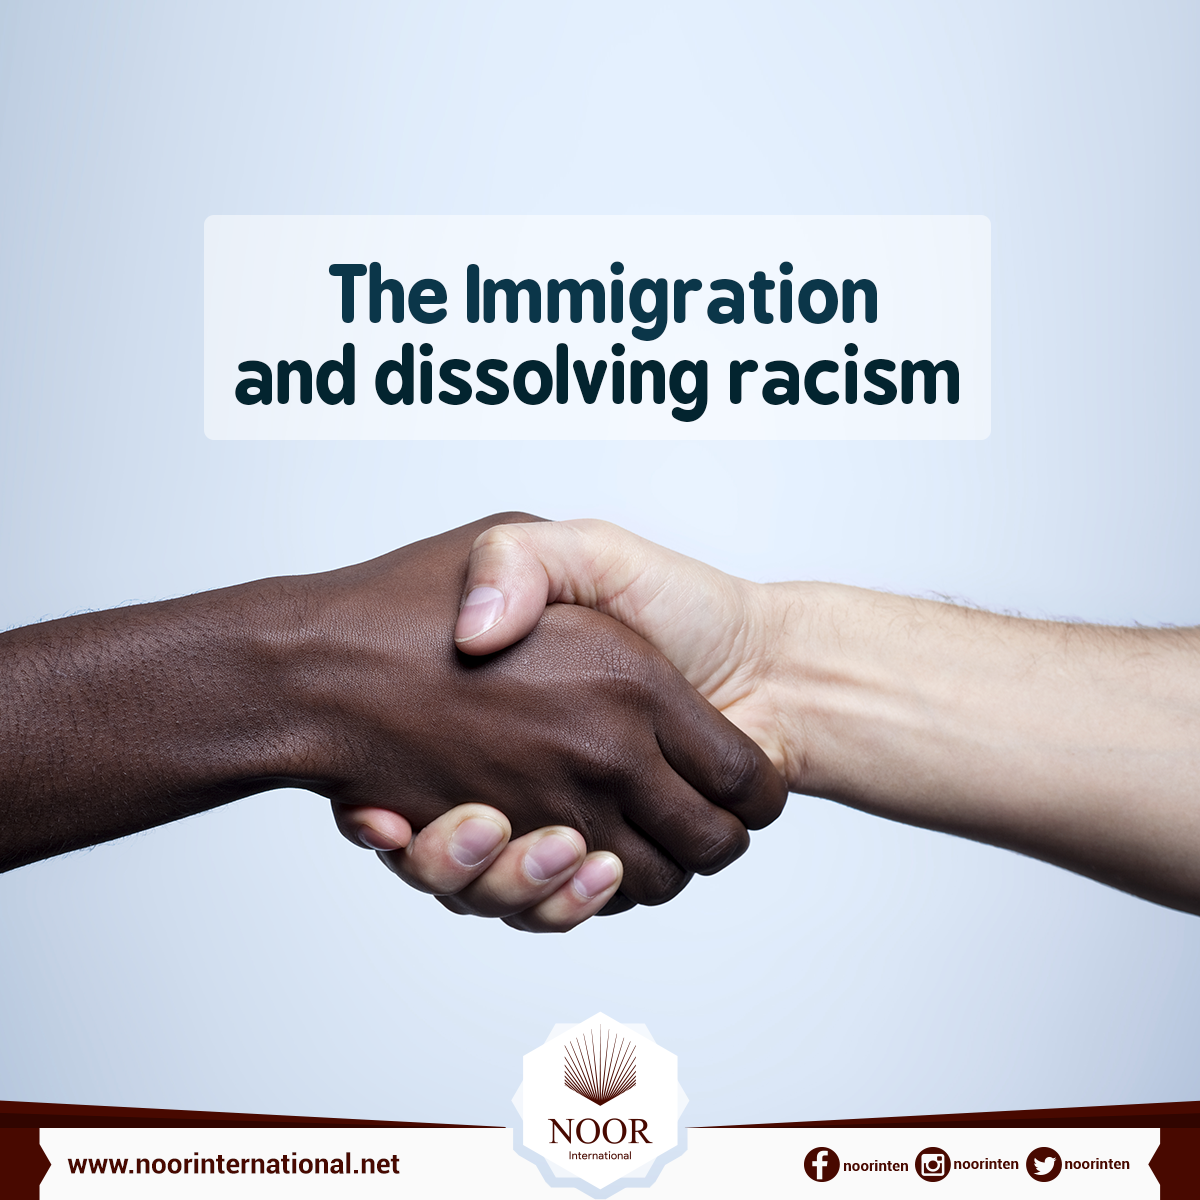 The Immigration and dissolving racism